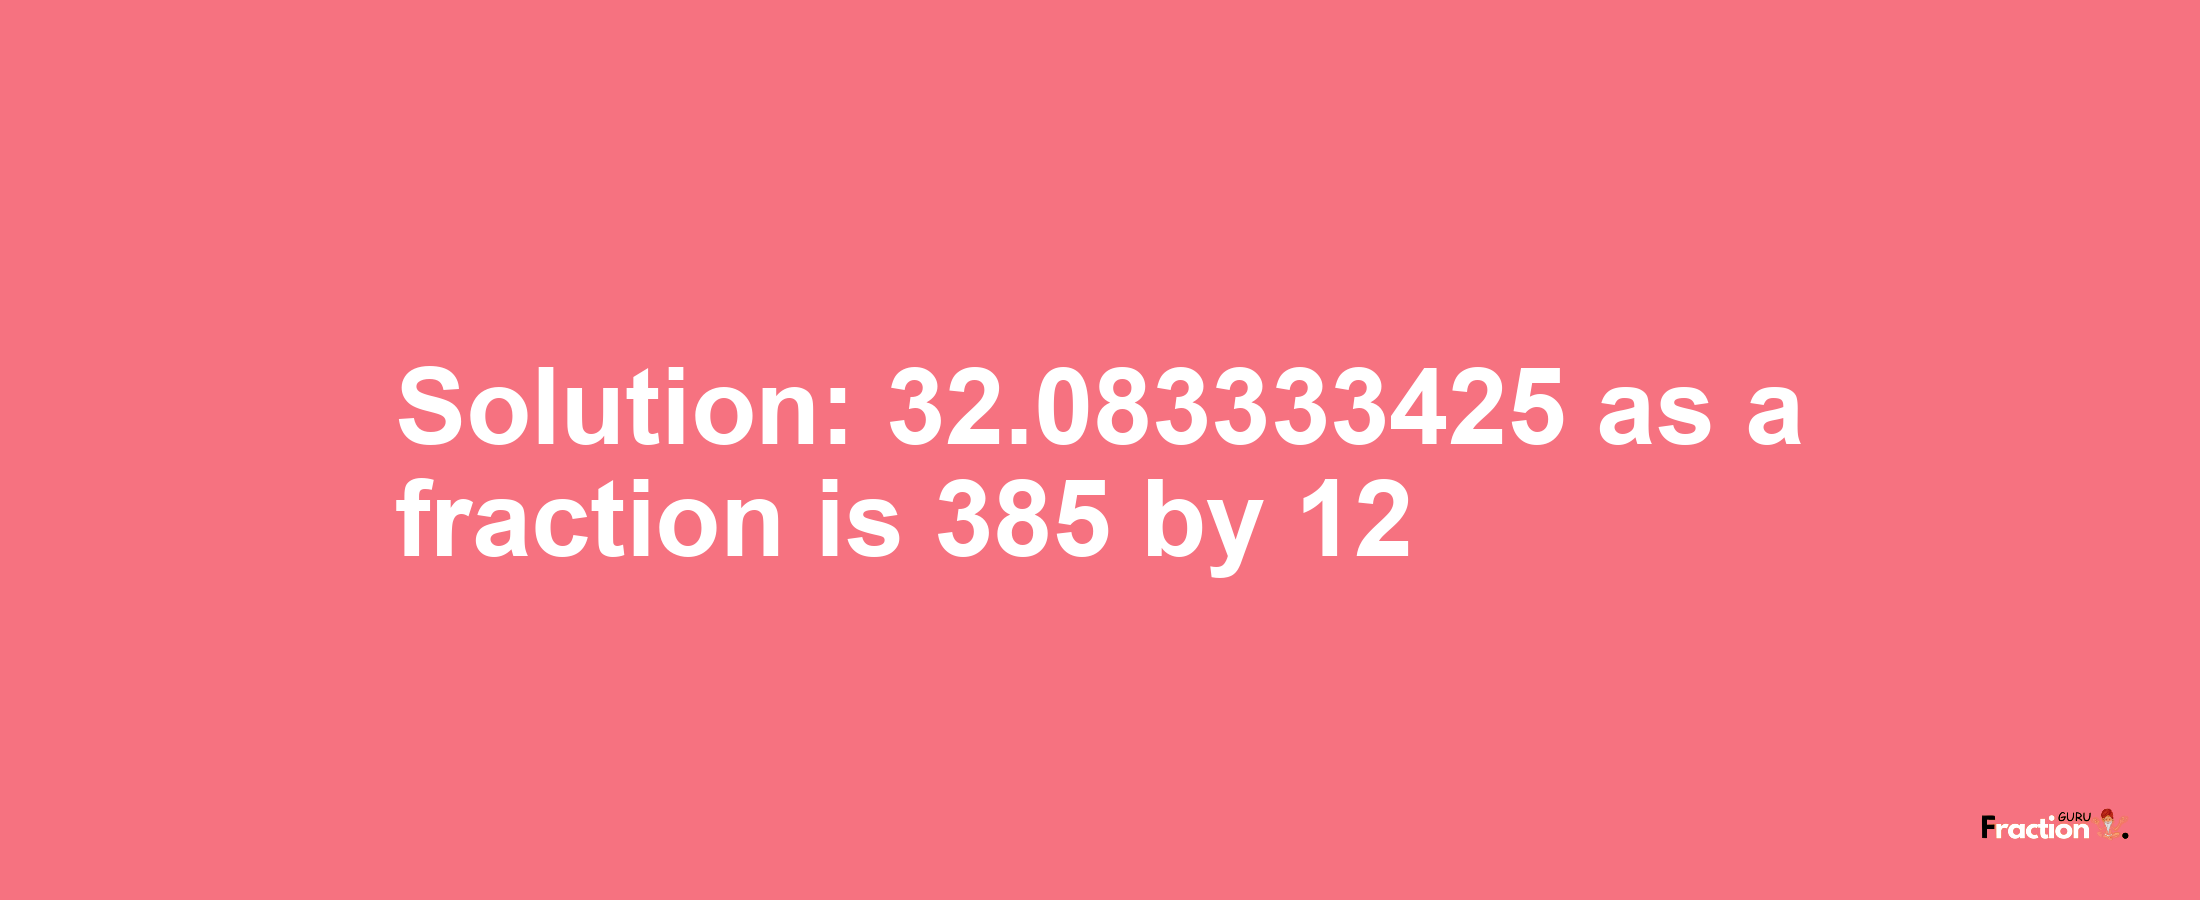 Solution:32.083333425 as a fraction is 385/12